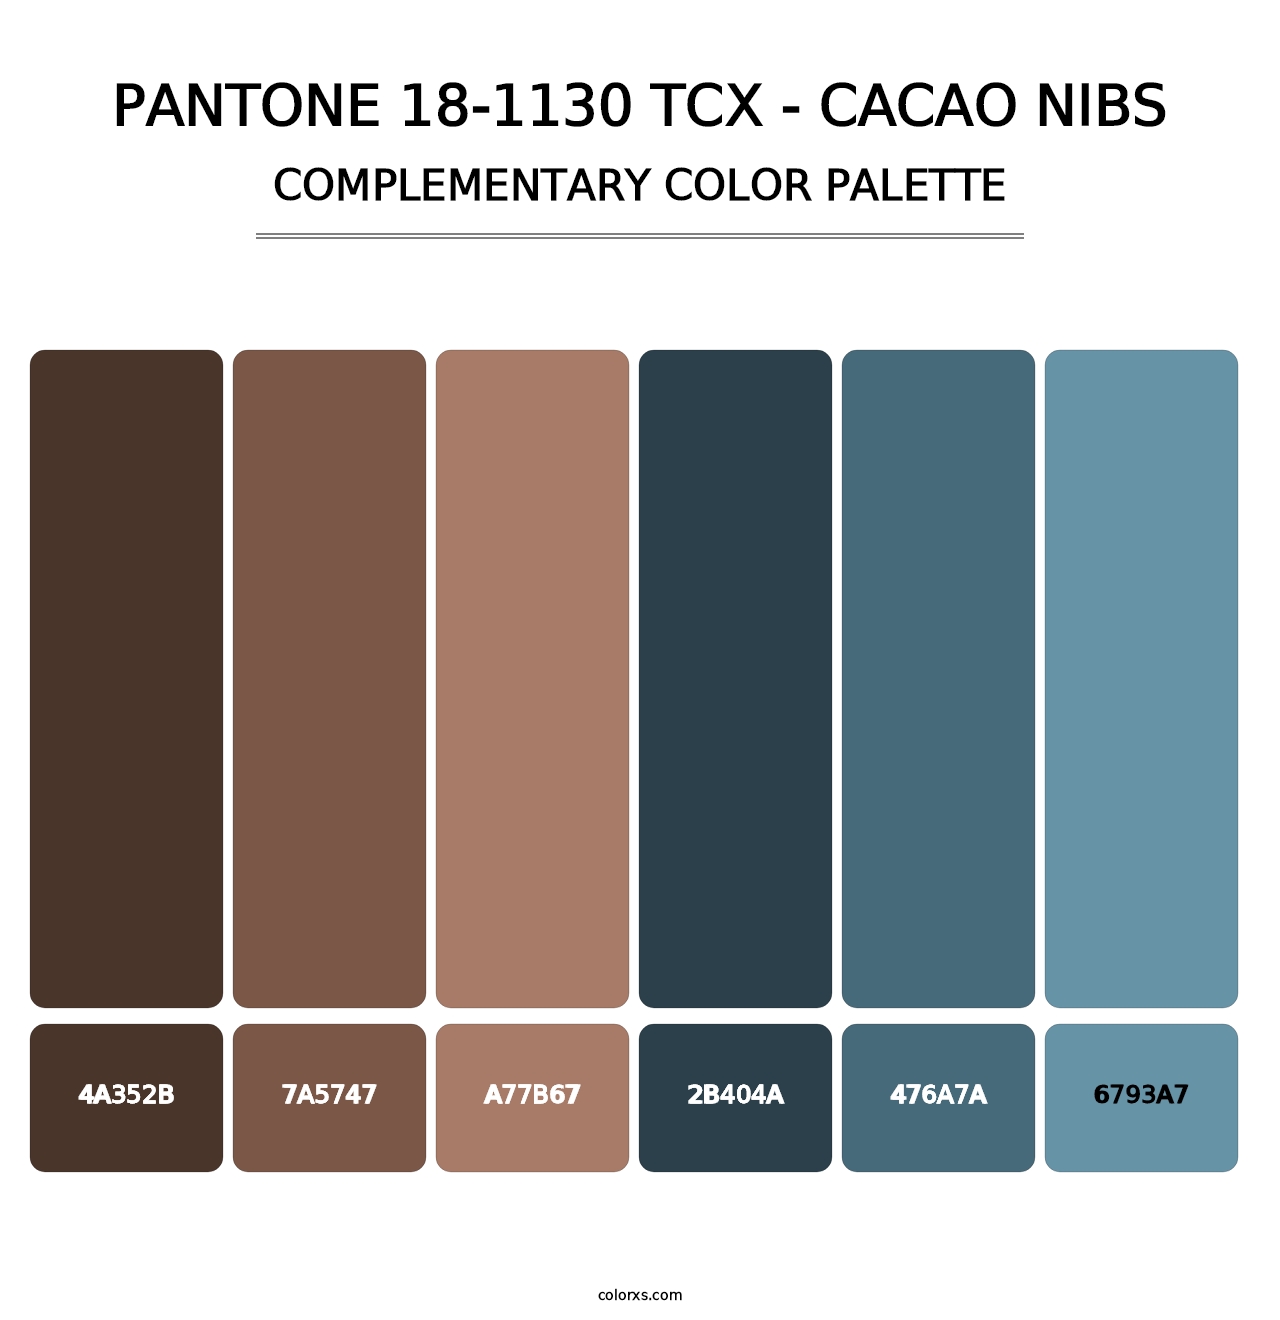 PANTONE 18-1130 TCX - Cacao Nibs - Complementary Color Palette